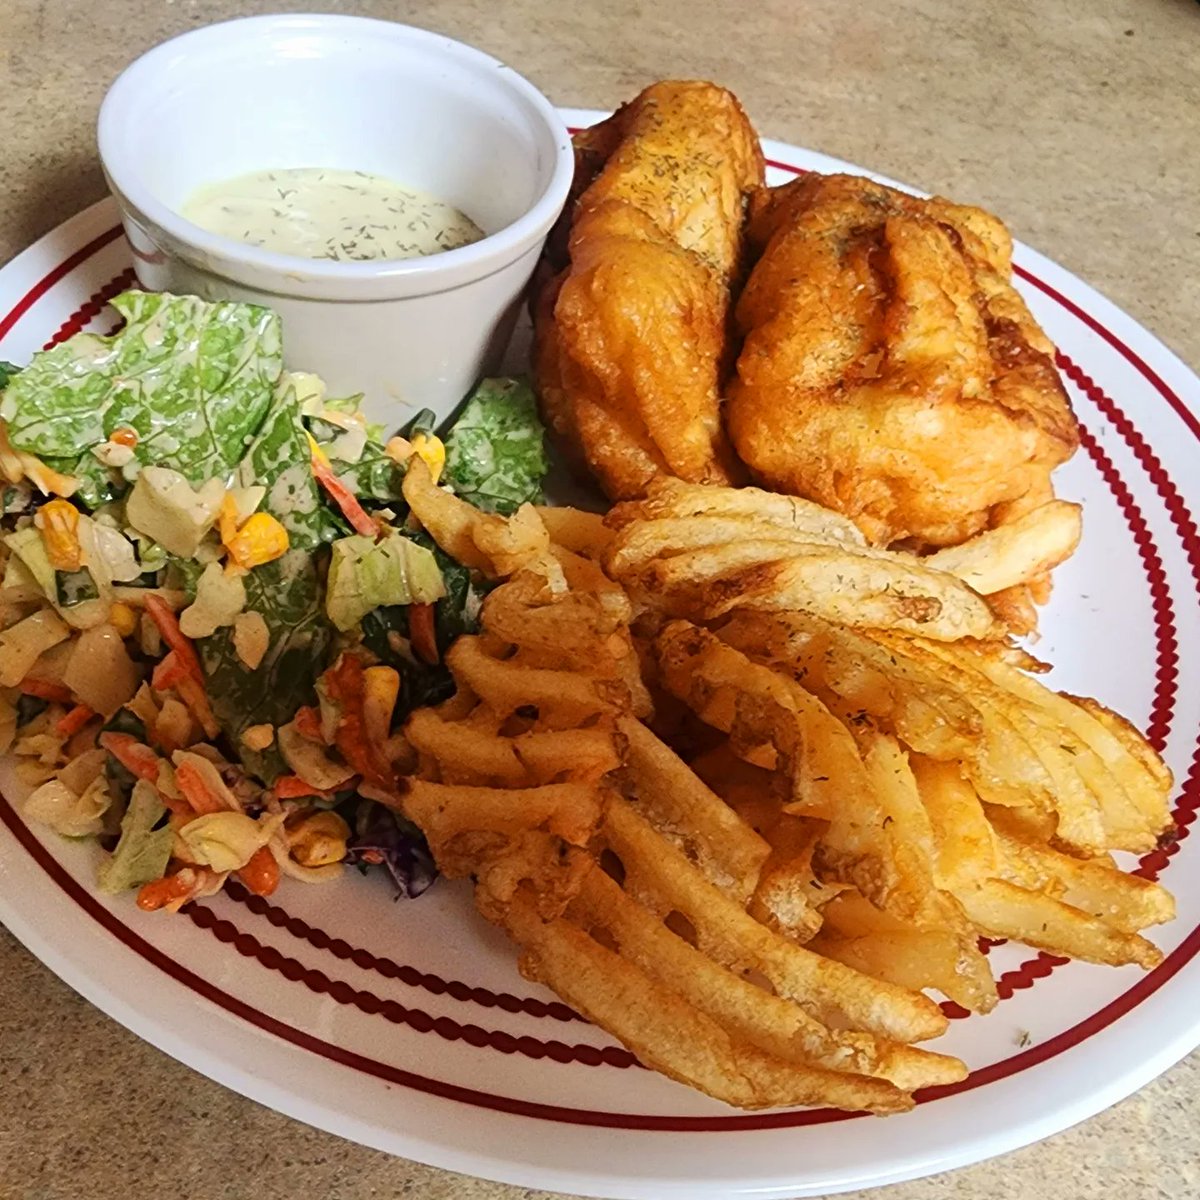 Made some British style Fish & Chips 
(I cheated on the chips with frozen ones) 
Side of Tartar Sauce, and Southwest Salad.
I used the Gordon Ramsay recipe for the fish batter with curry powder and fresh cod fillets. Sparkling water in place of beer. https://t.co/nrxFNGsBDk